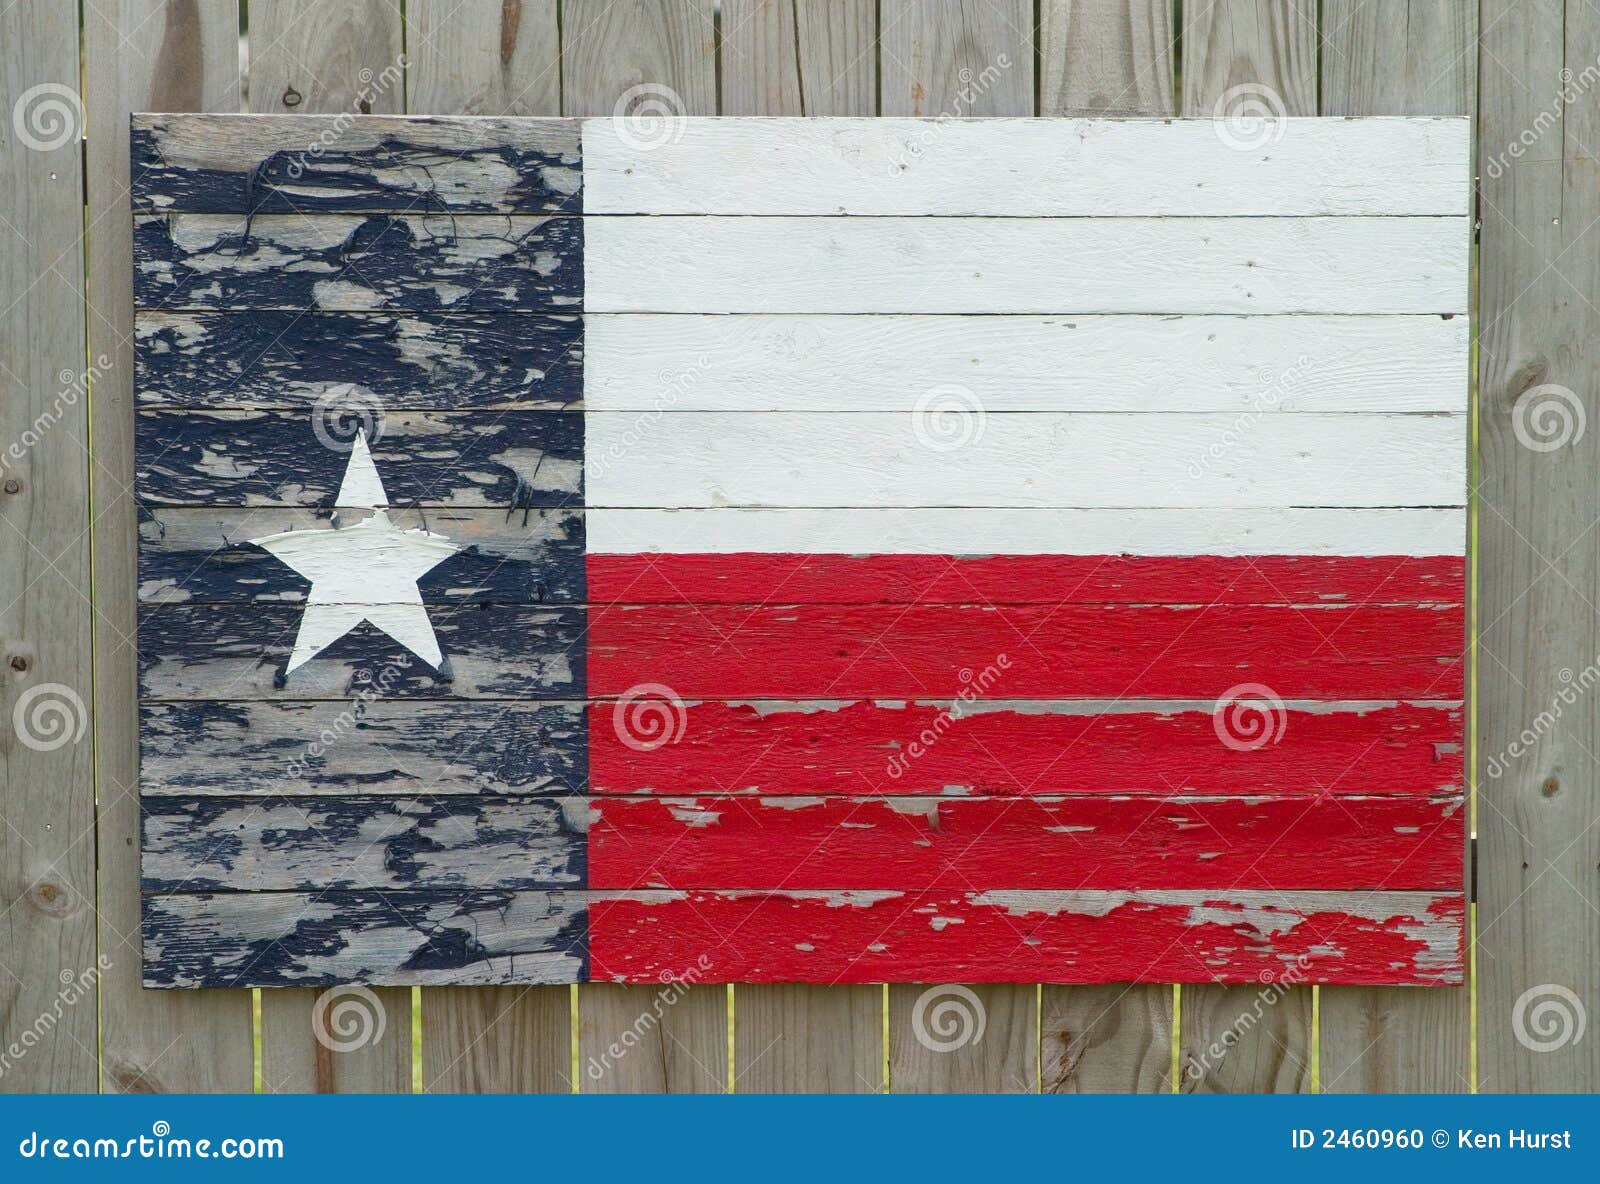 wood painting flag painted wood a Texas rustic rustic sign on slats fence. Old  onto